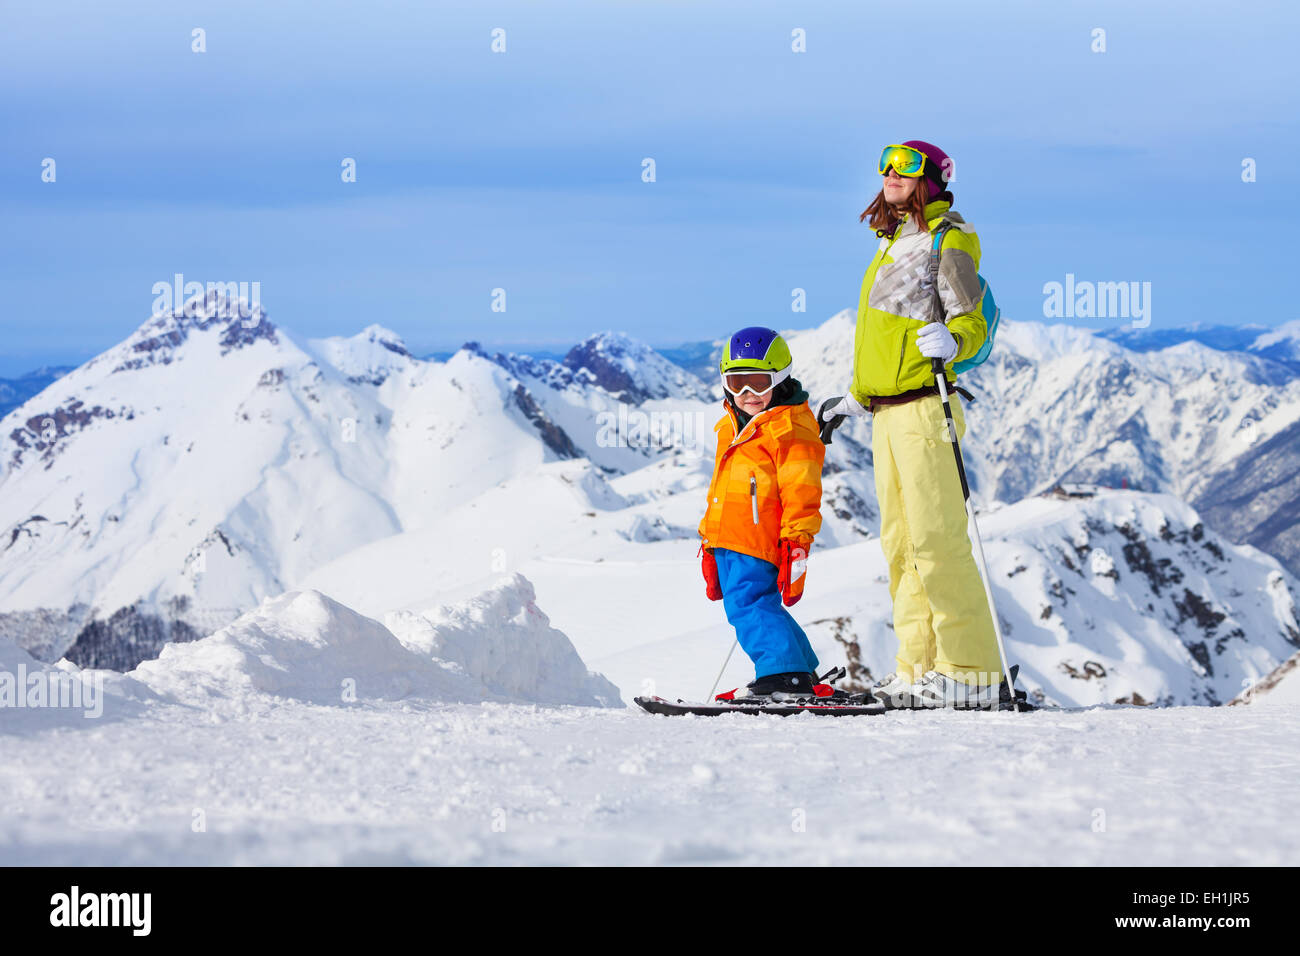 Ski vacation in mountains, woman and child happy Stock Photo